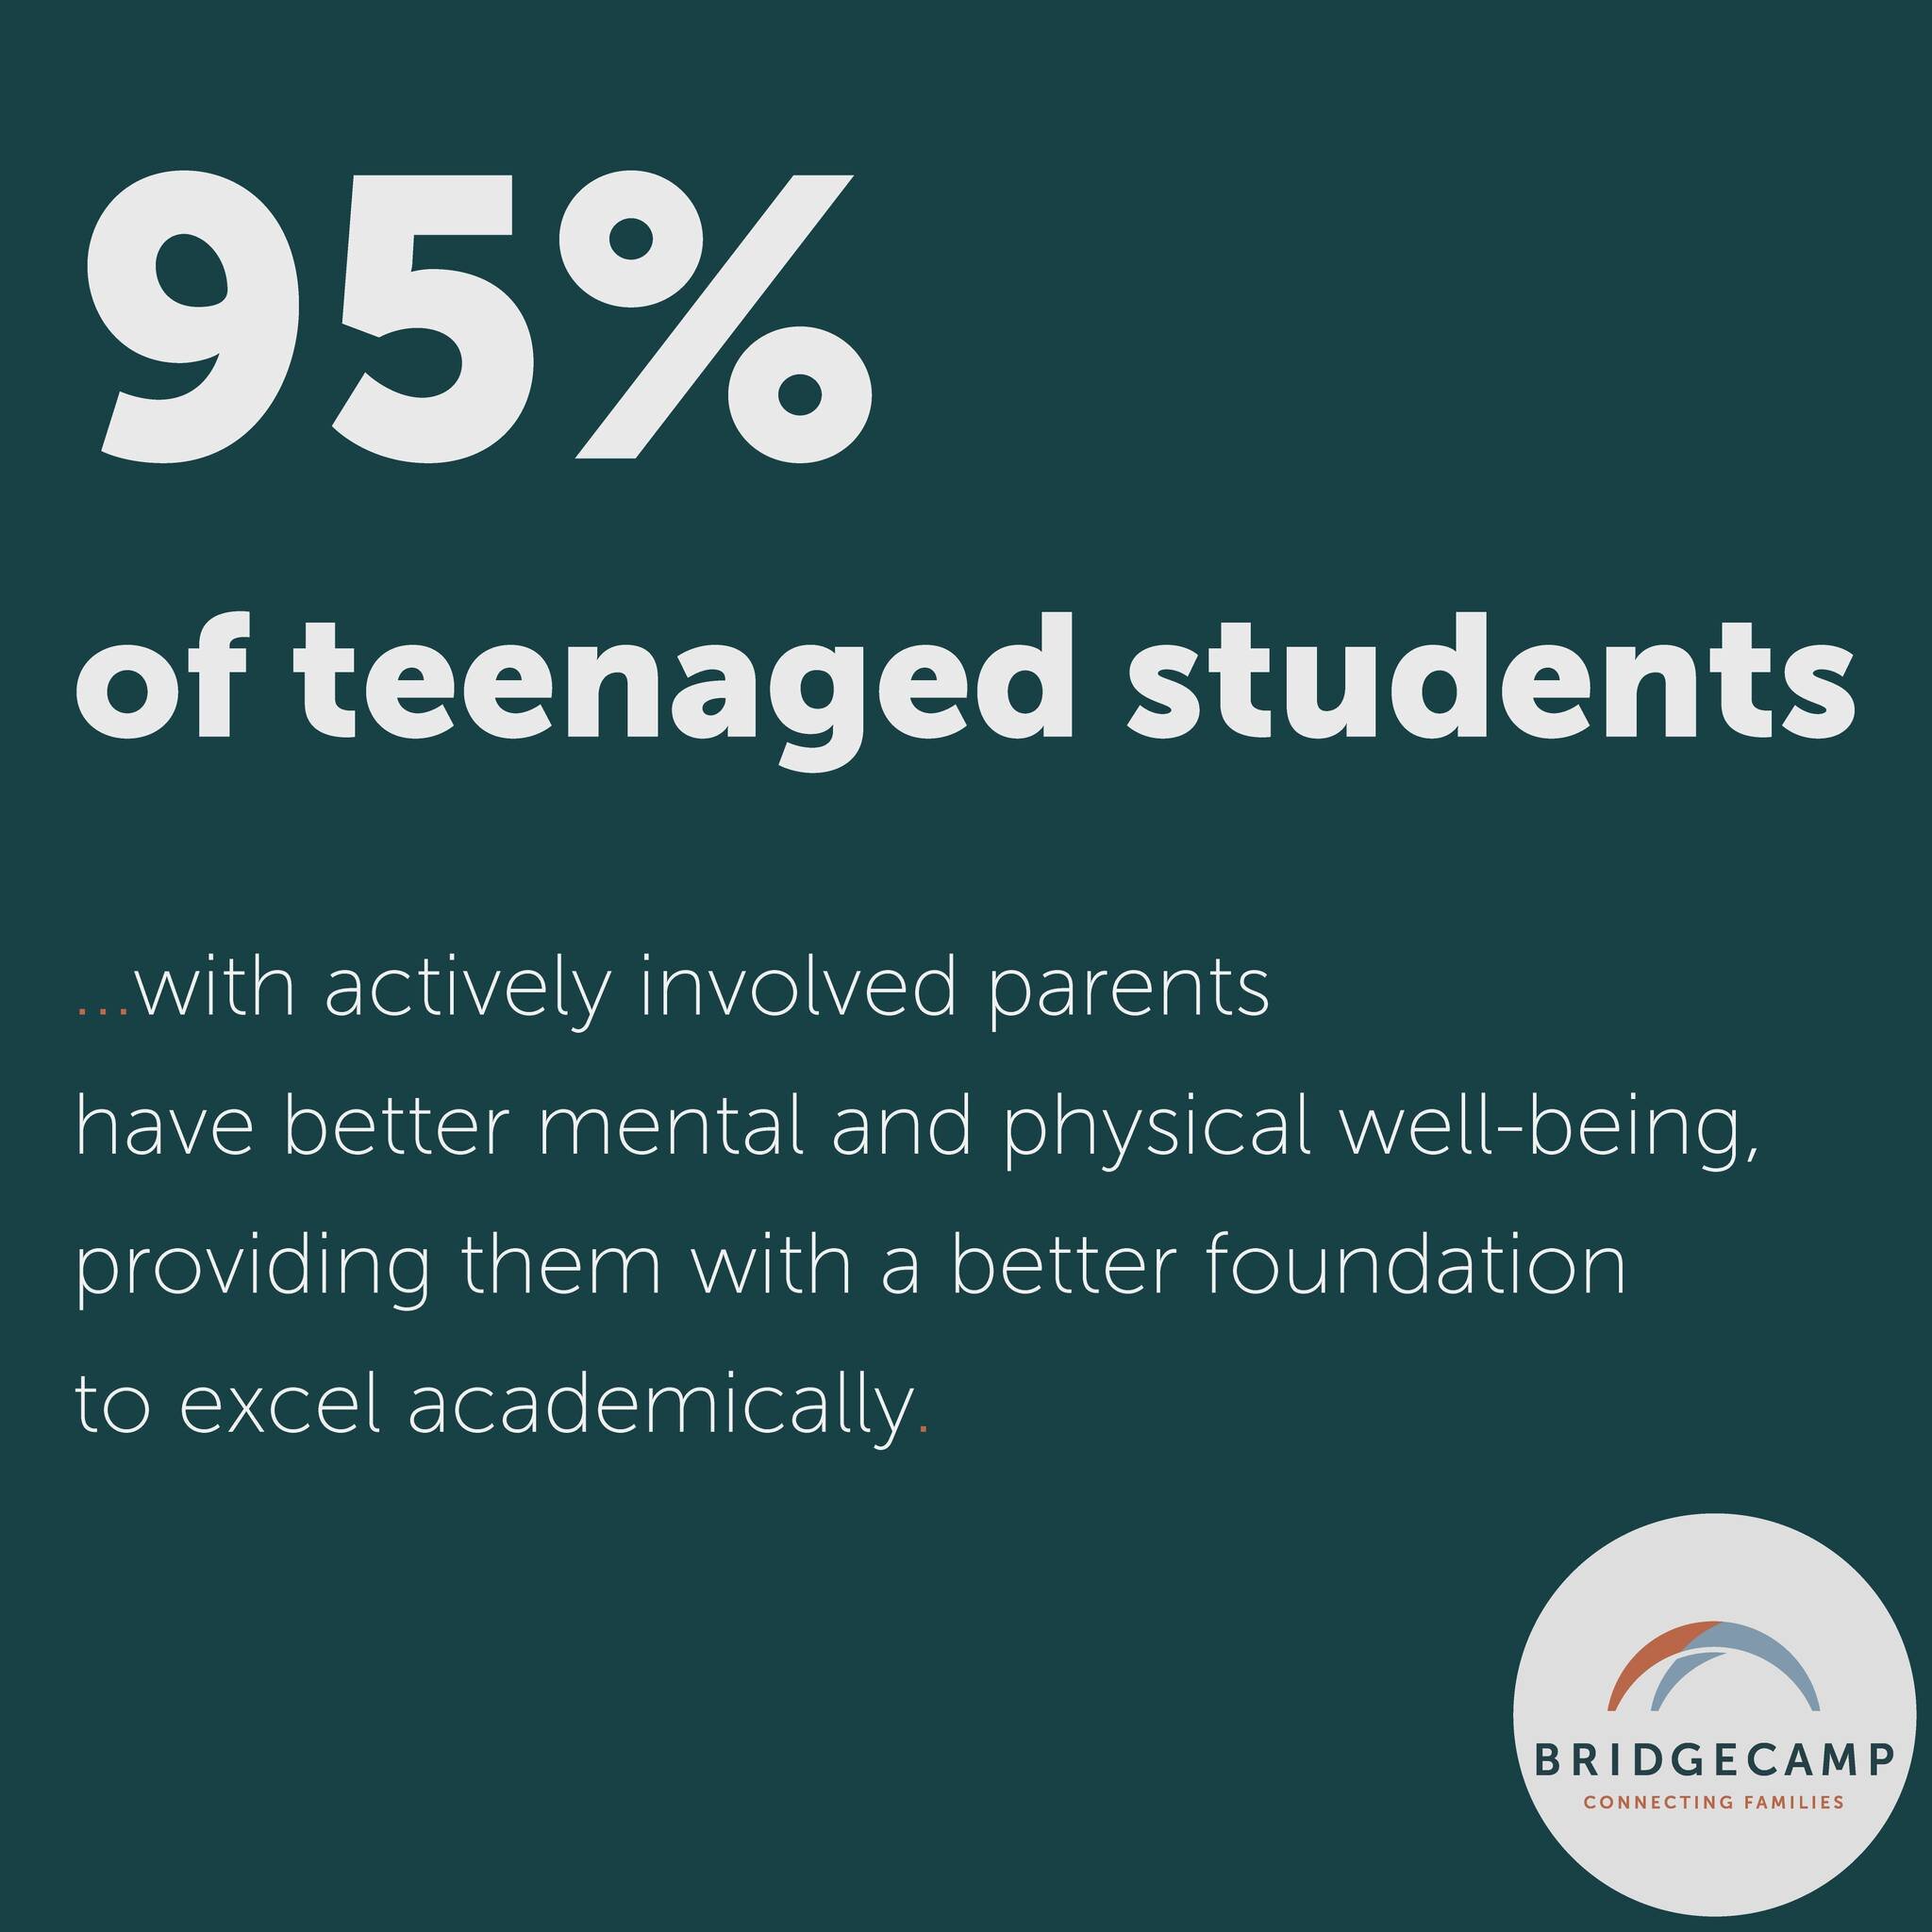 Parents - never underestimate how impactful your role is in your teen's future. The bond between parents and teens can be tricky to manage, but the importance can't be overstated.

#parenting #parentinglife #familyfirst #getinvolved #parentingteens